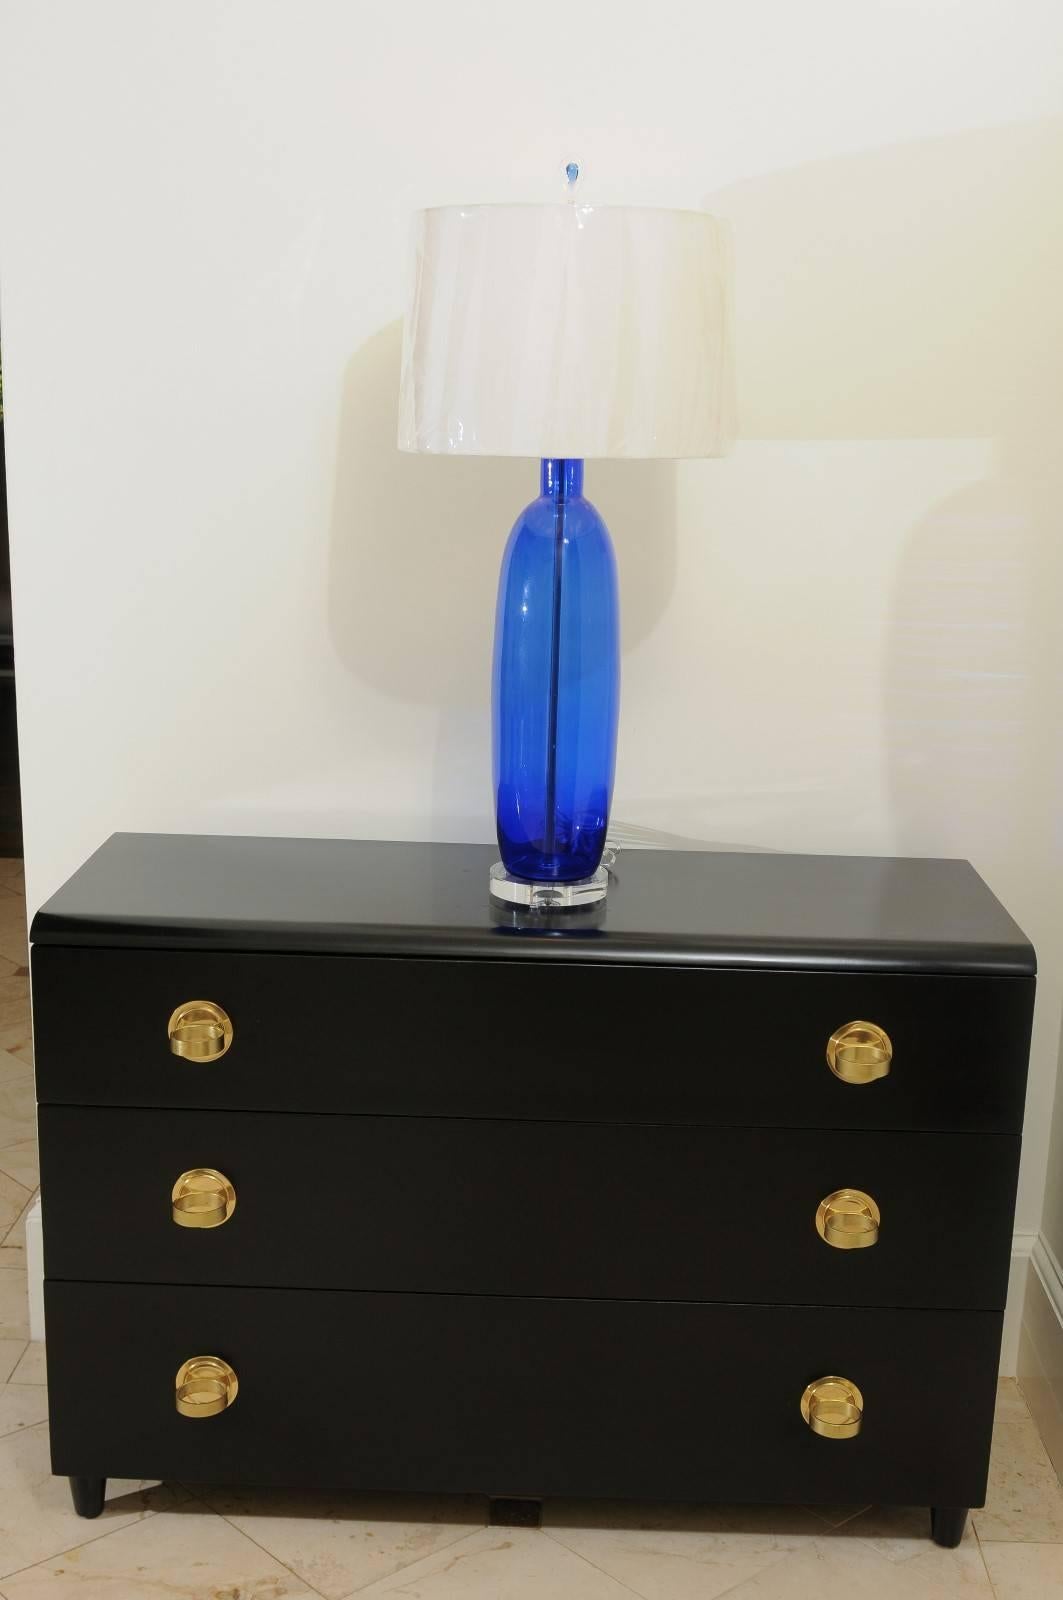 A stunning pair of large-scale blown glass lamps, circa 1970. Beautiful shape and form in a staggering Cobalt color. Lovely blown glass finials ice the cake. Restored using components of only the finest quality. Exceptional jewelry! Excellent